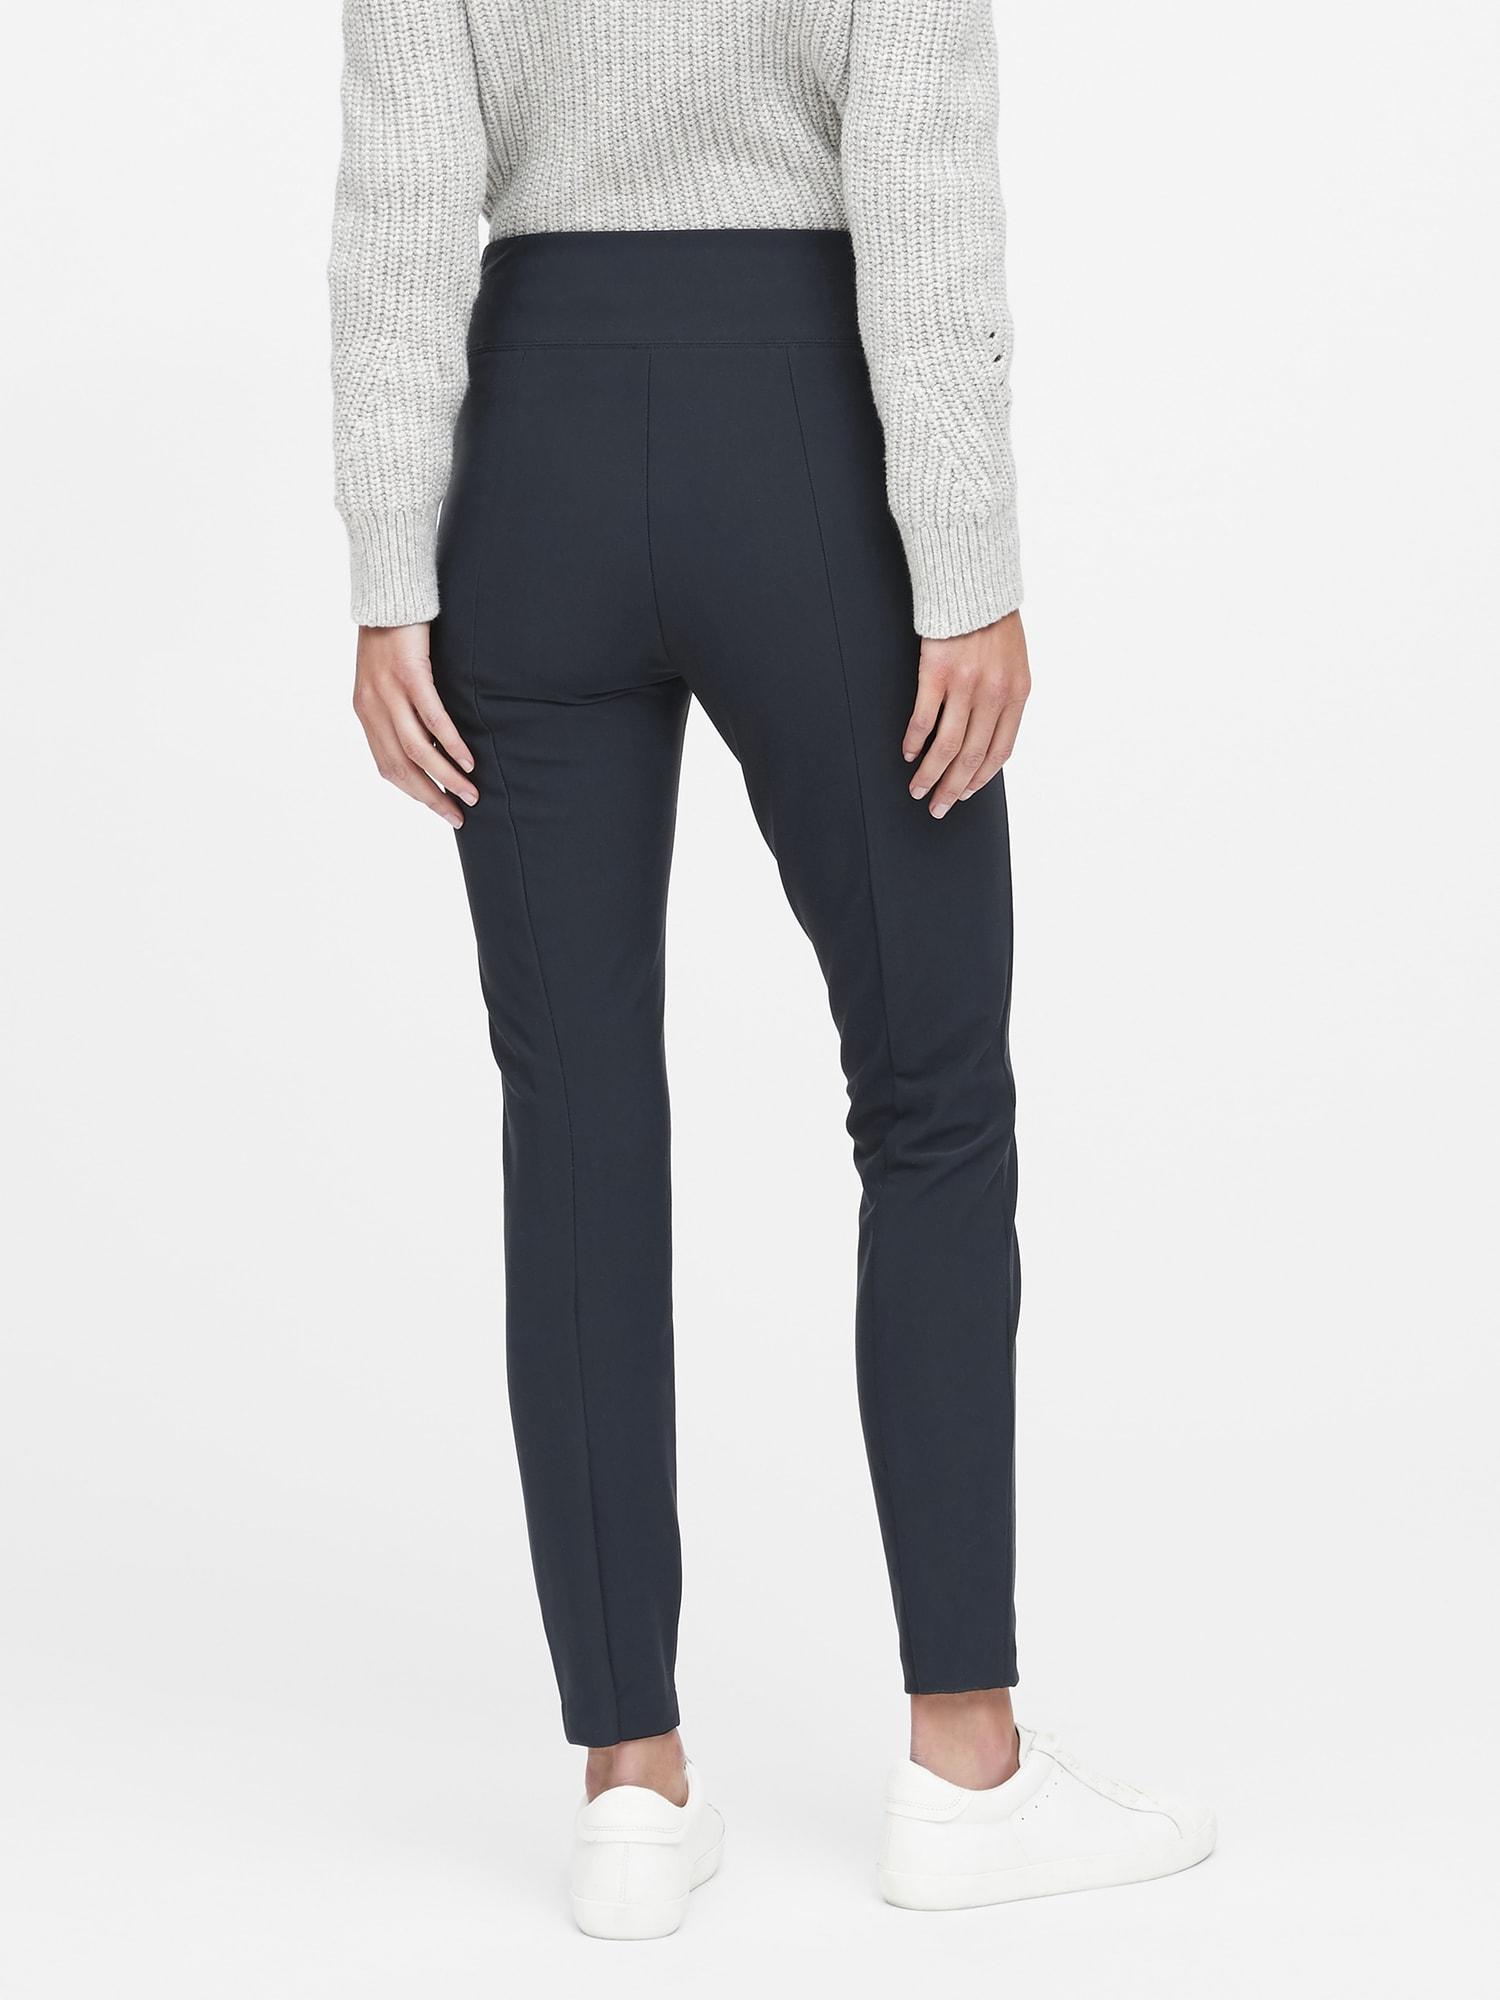 Banana Republic Slim Packable Performance Pant in Navy (Blue) - Lyst